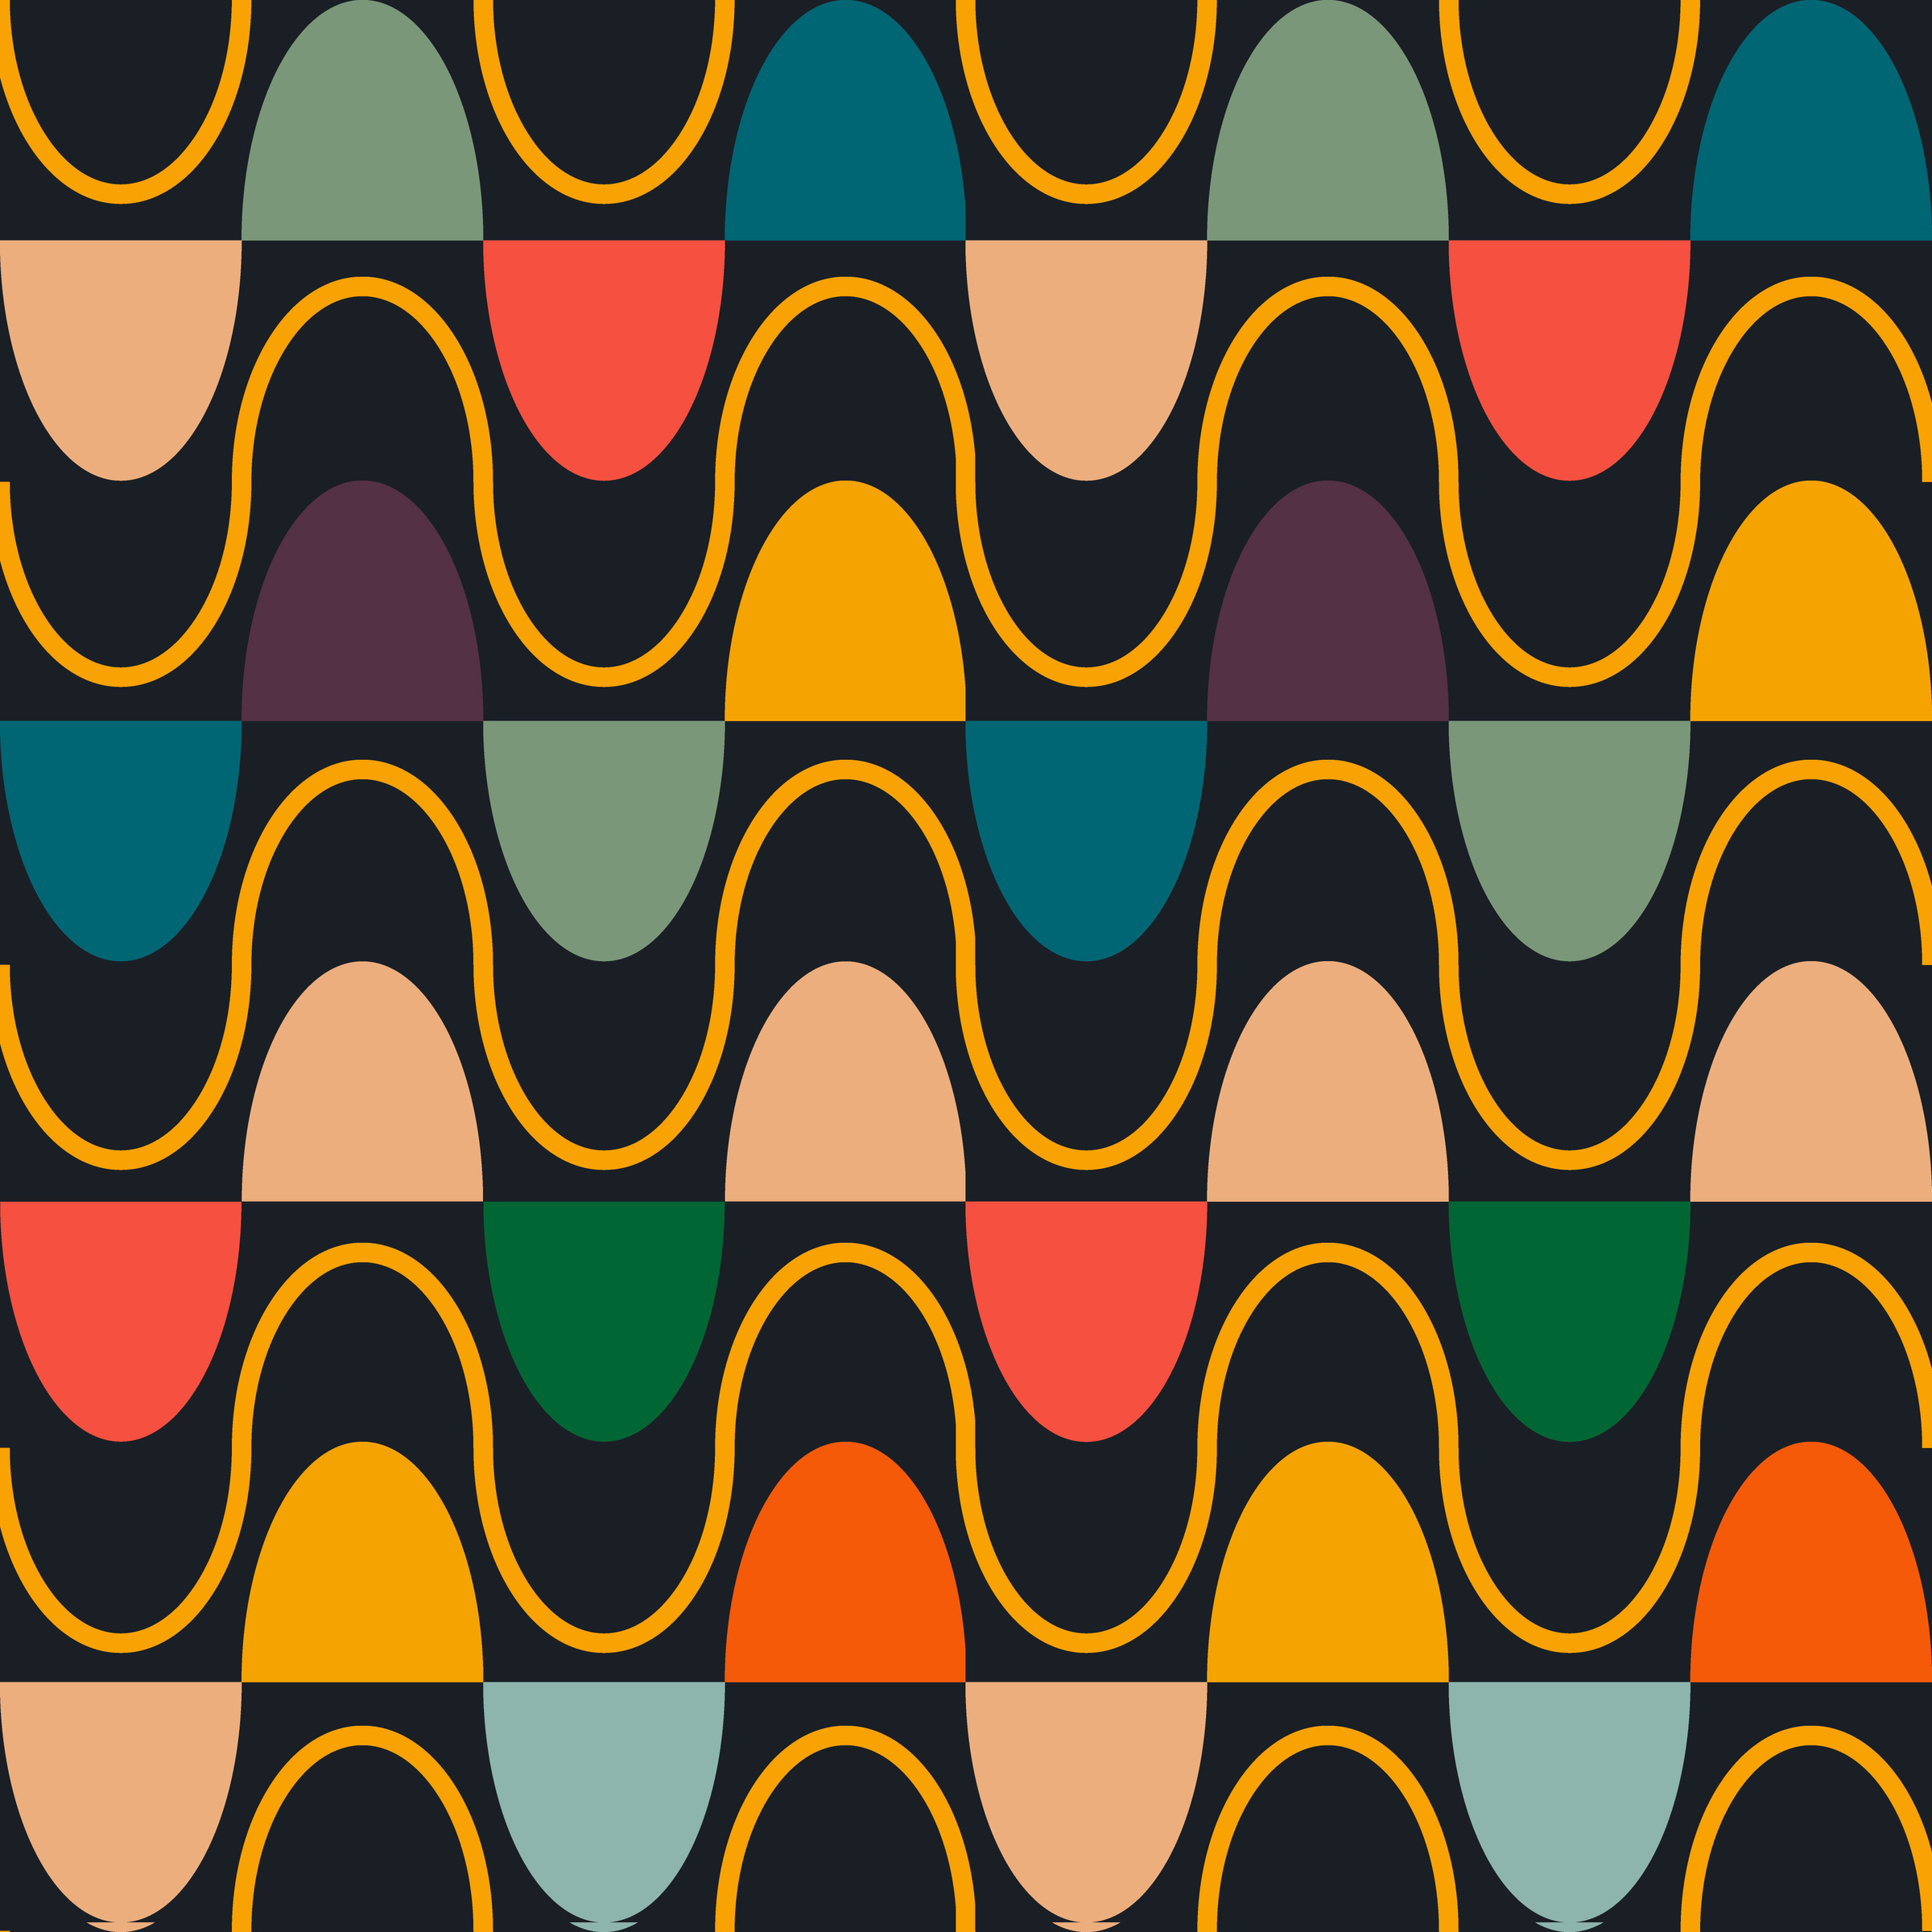 Retro pattern in the style of the 70s and 60s